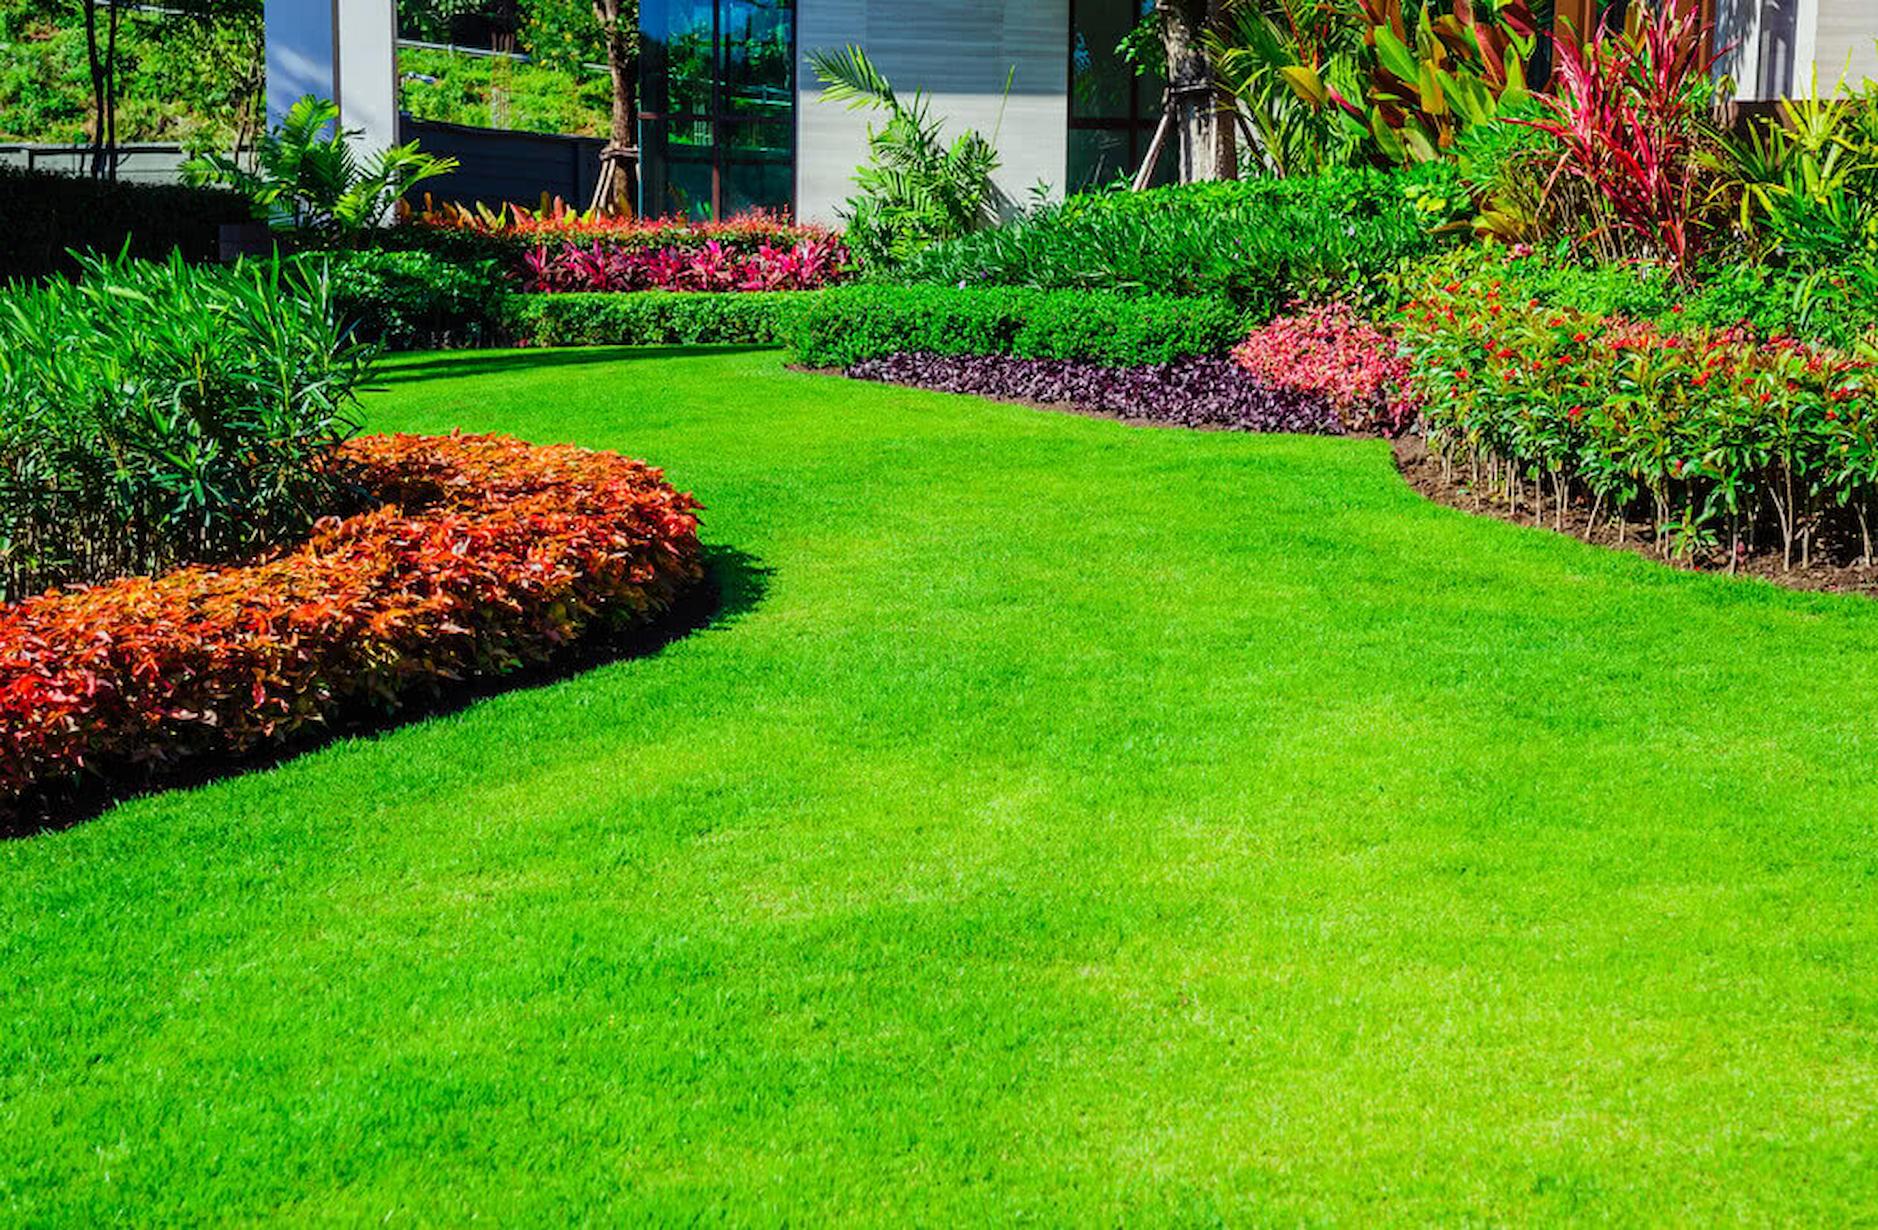 Why Should You Have A Small Landscape In Front Of Your House?